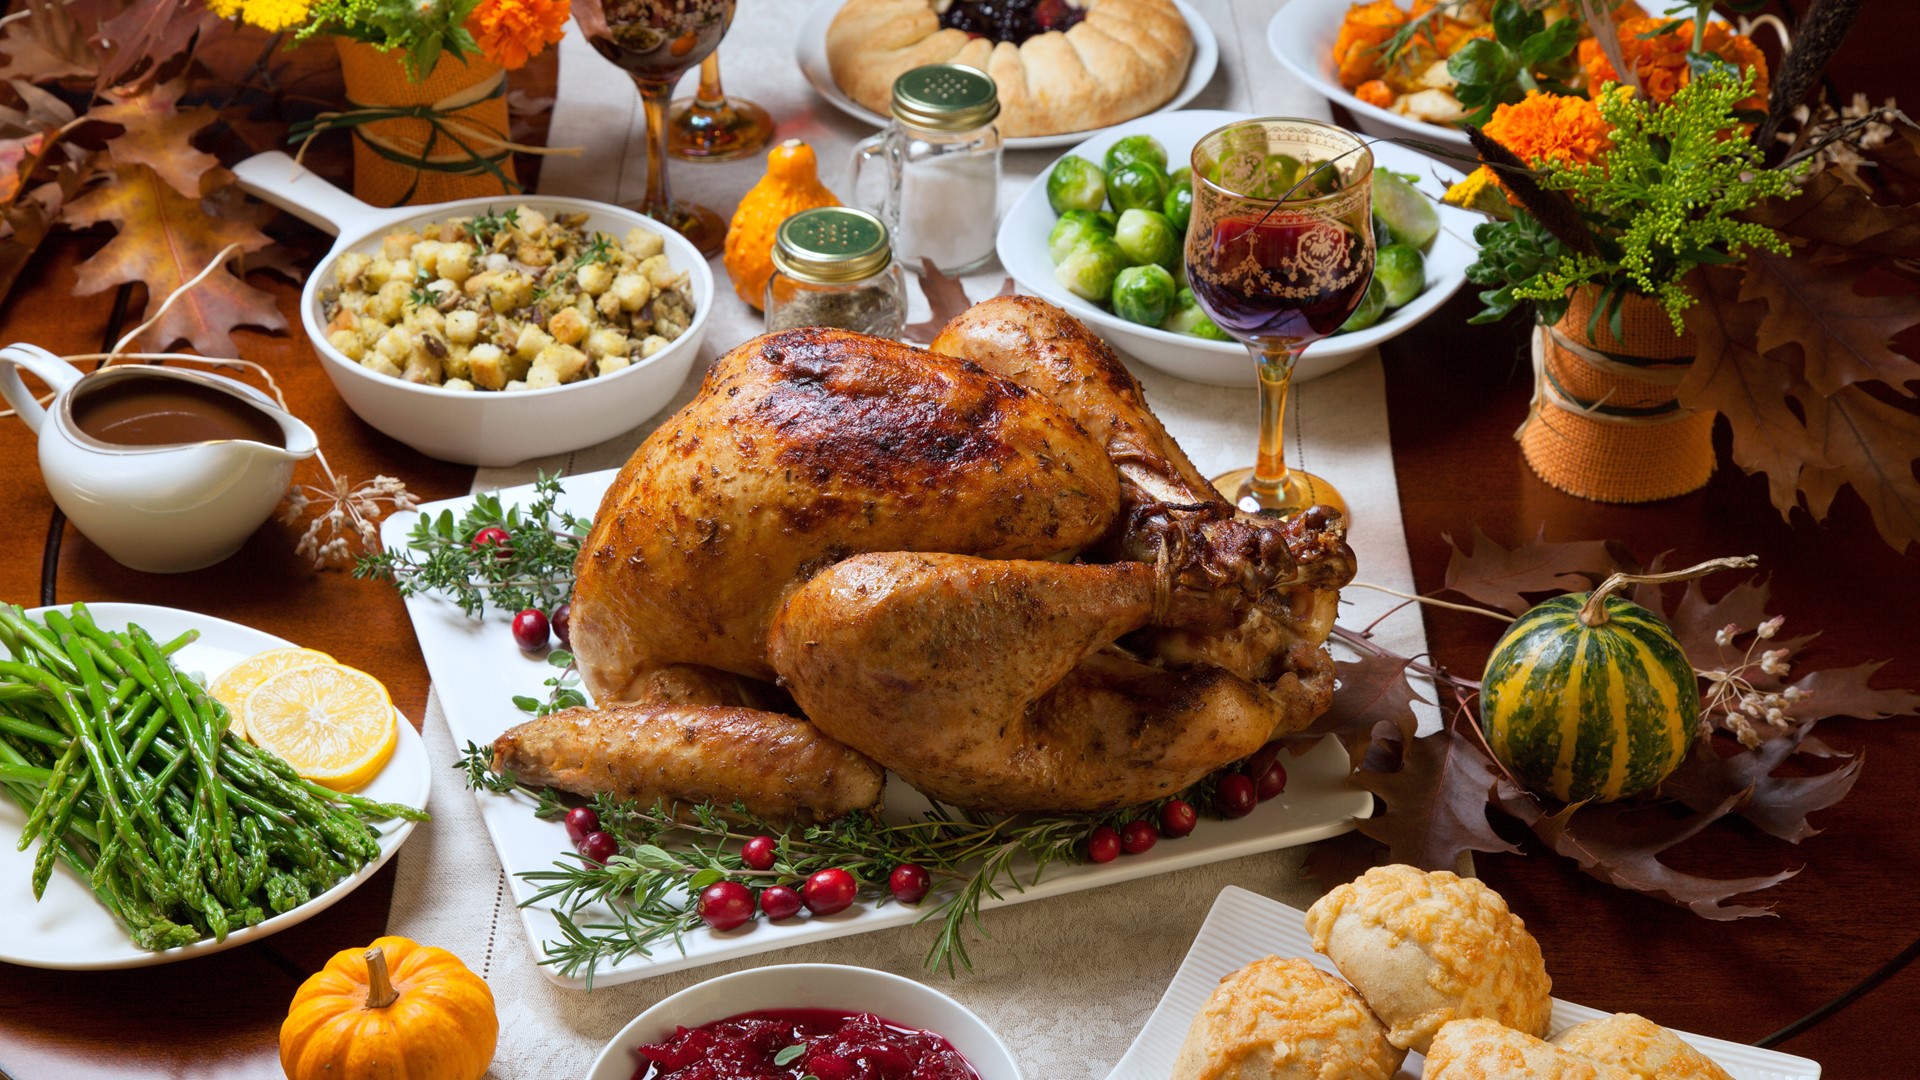 A new report from Wells Fargo makes a case for enjoying Thanksgiving dinner at a restaurant instead of at home this year.